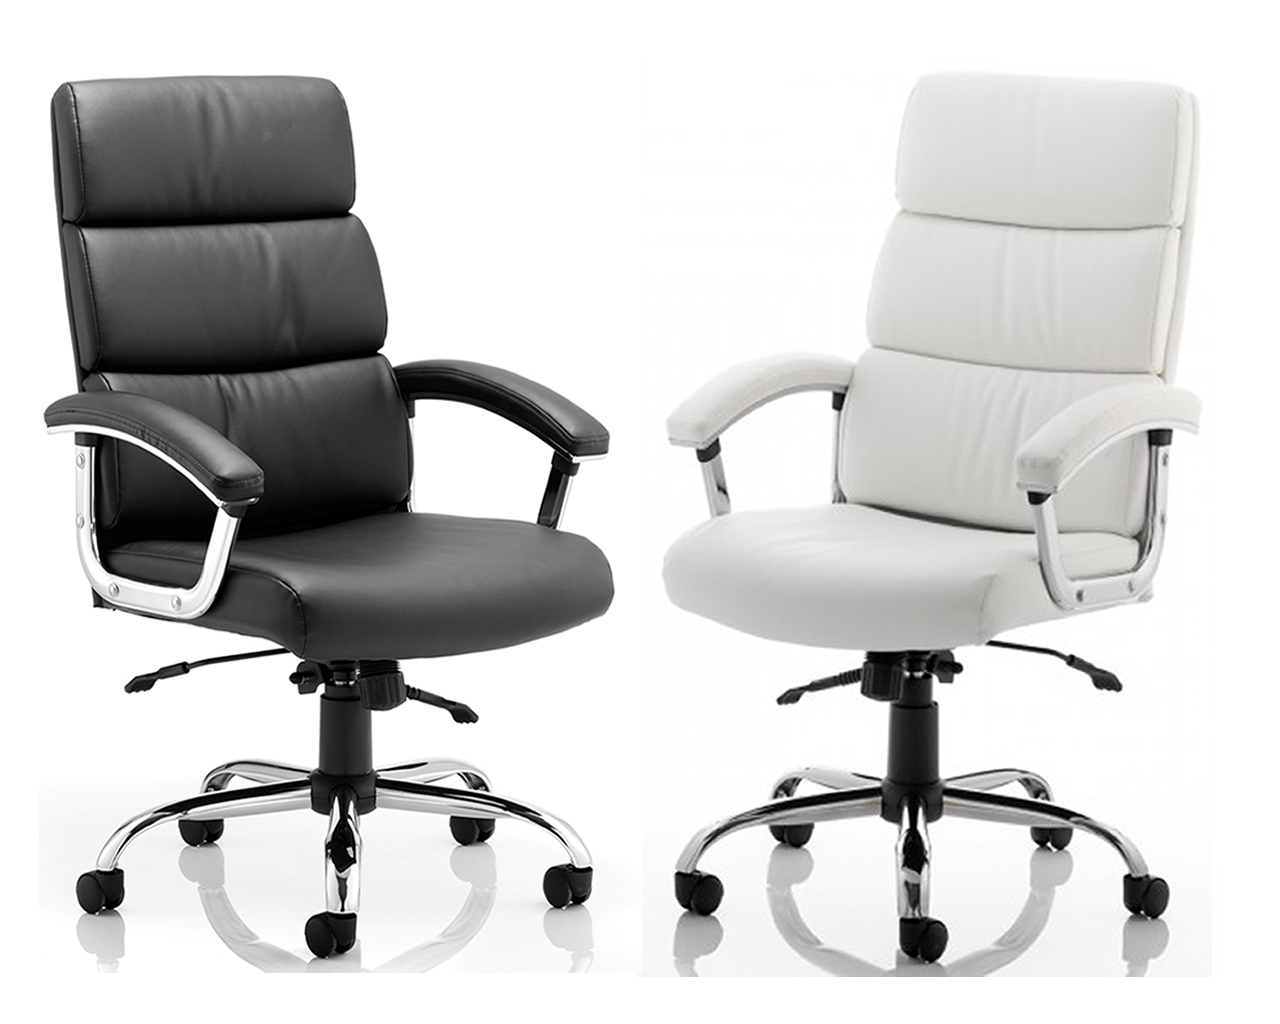 Desire High Back Leather Office Chair - Black or White Option Huddersfield